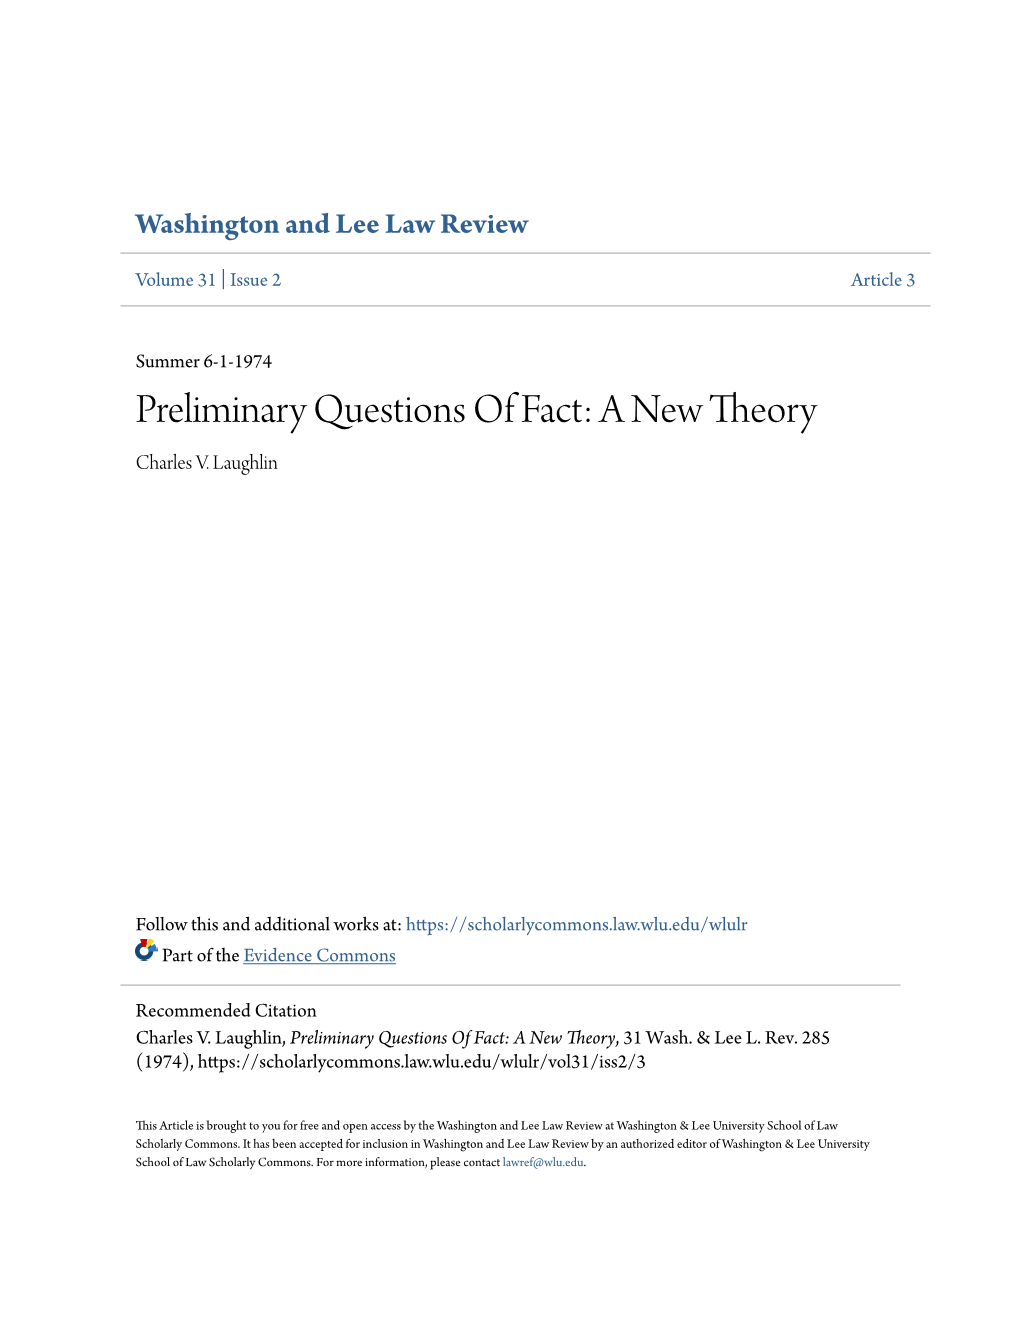 Preliminary Questions of Fact: a New Theory Charles V